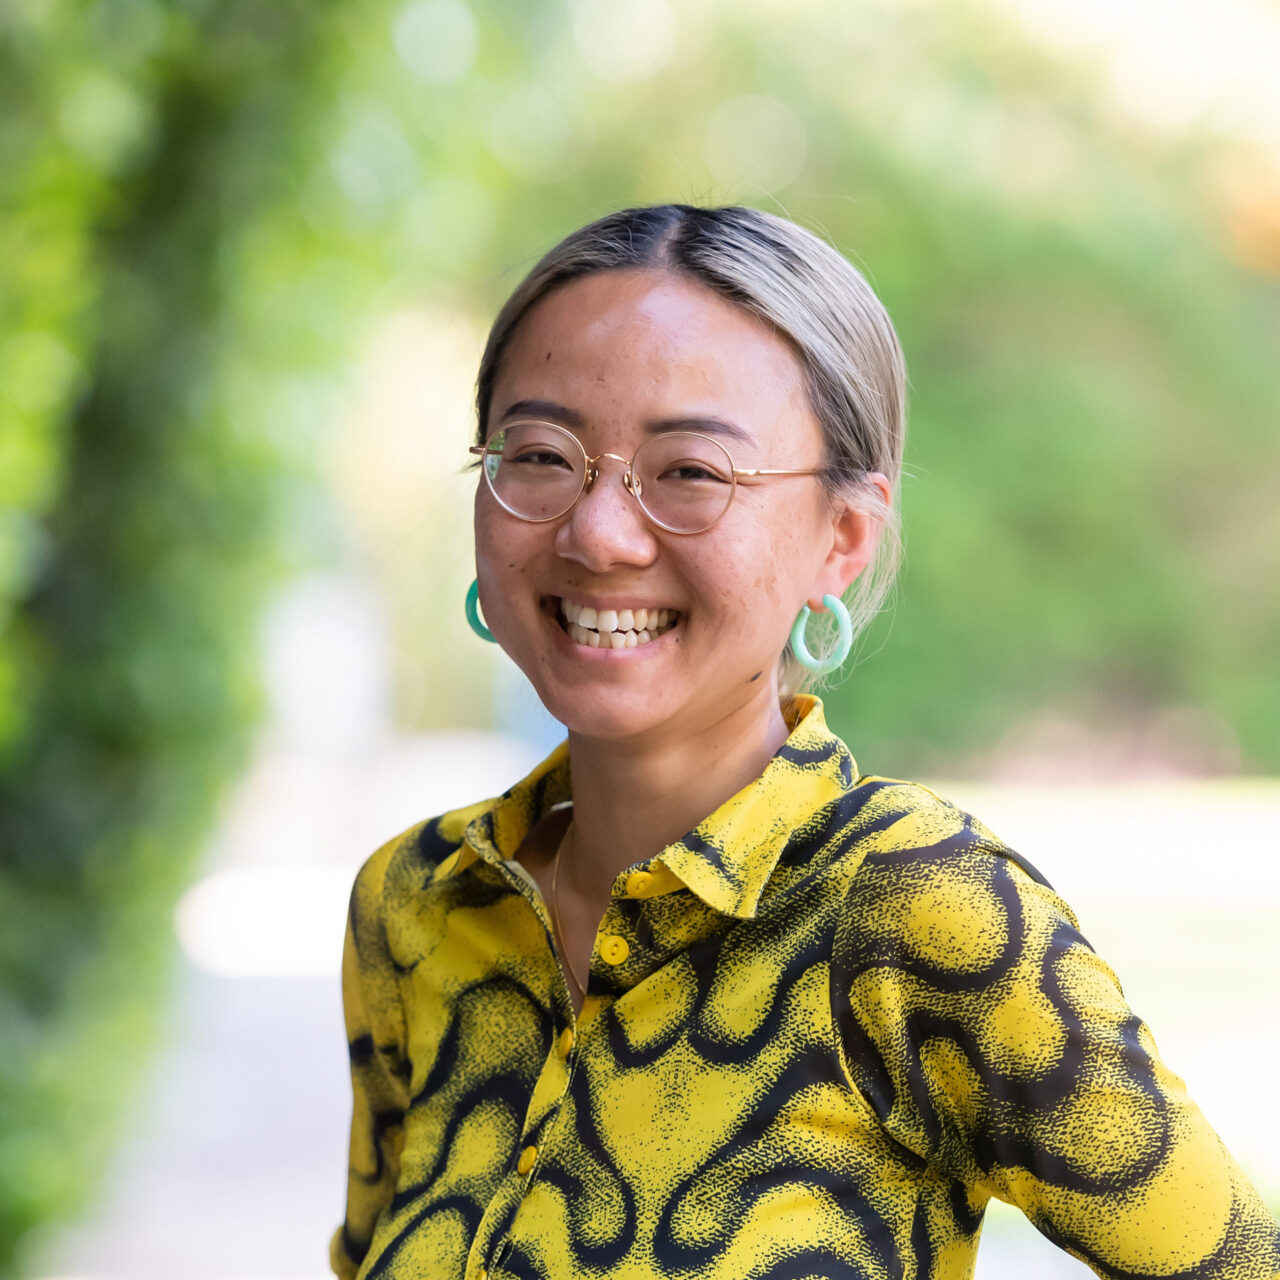 Xiaowei Wang is a Chinese person (AFAB), with dyed blond hair, and dark brown/black roots. Xiaowei is wearing a cool funky, button-up blouse with yellow and black round patterns, and jade earrings. They are standing outside, smiling brightly in front of shrubs and trees in what seems like a sunny day.